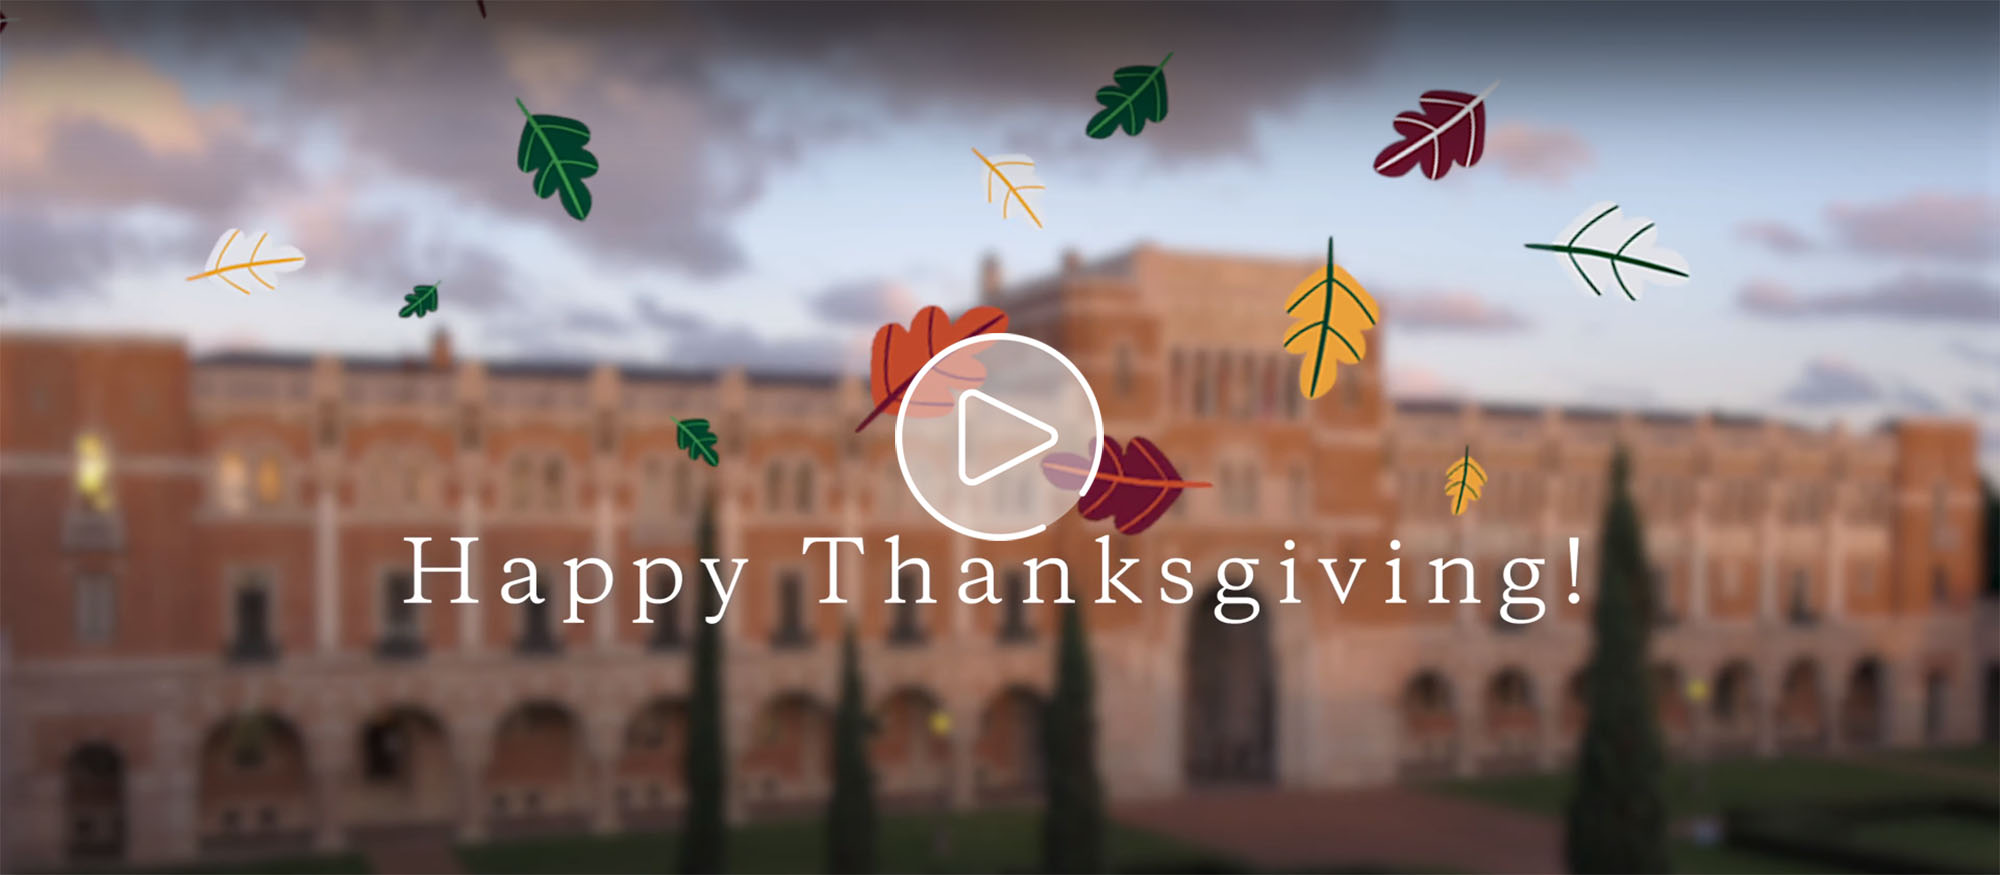 A still from the video featuring the front of Lovett Hall and overlay text reading "Happy Thanksgiving" as well as a graphic of red and green leaves falling down.